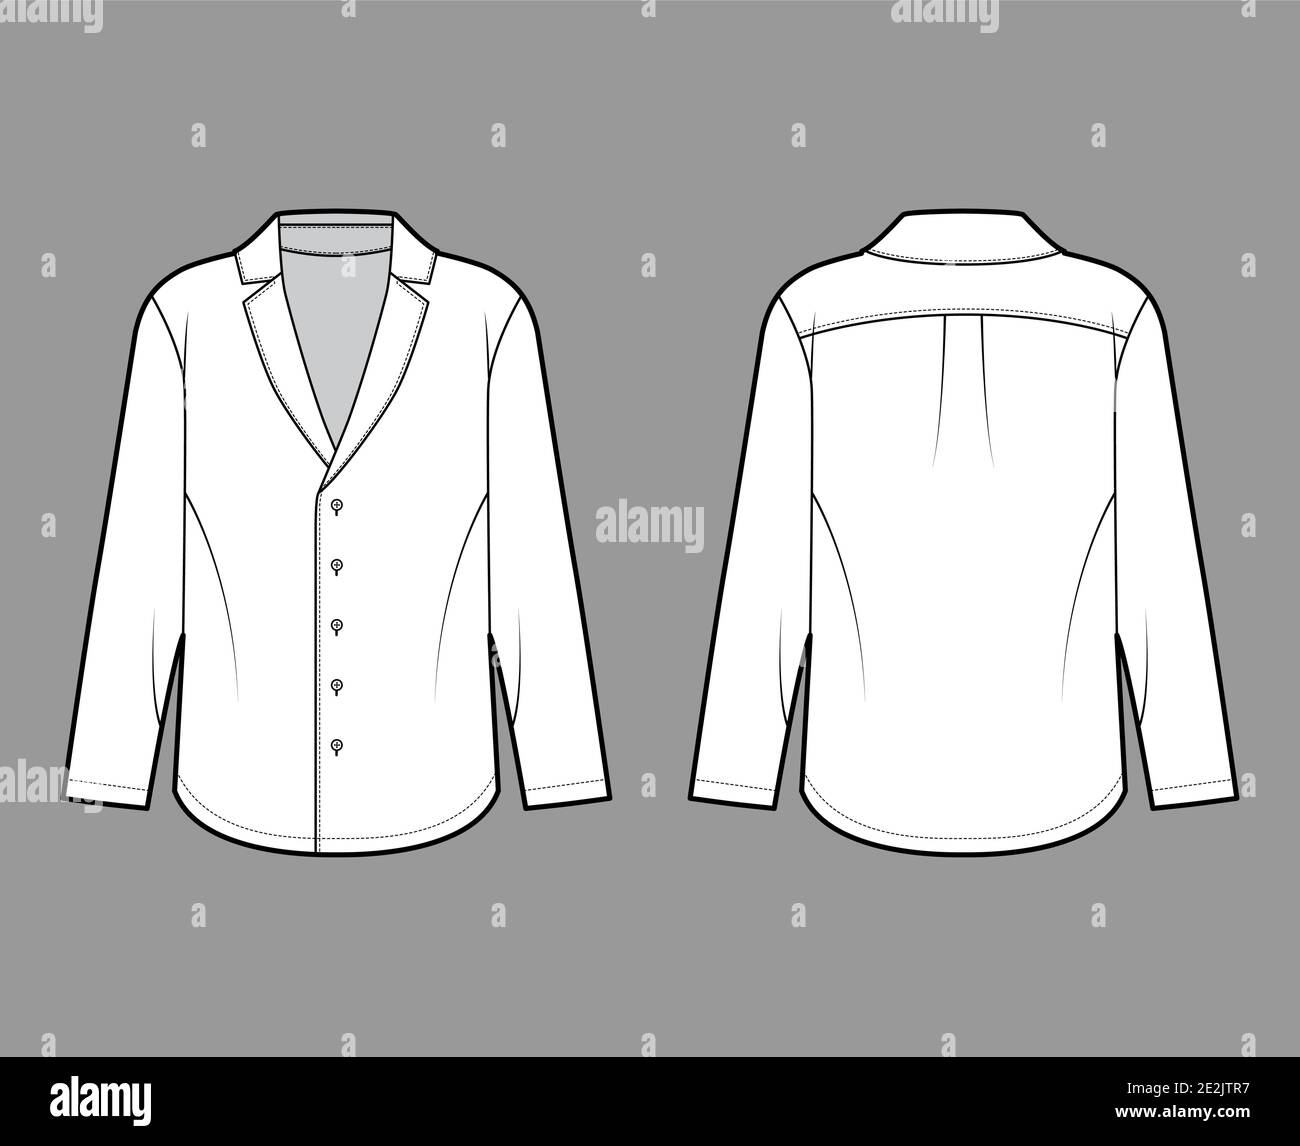 Pajama-style shirt technical fashion illustration with loose silhouette, pointed notch collar, front button fastenings, long sleeves. Flat apparel template front back white color. Women men unisex top Stock Vector